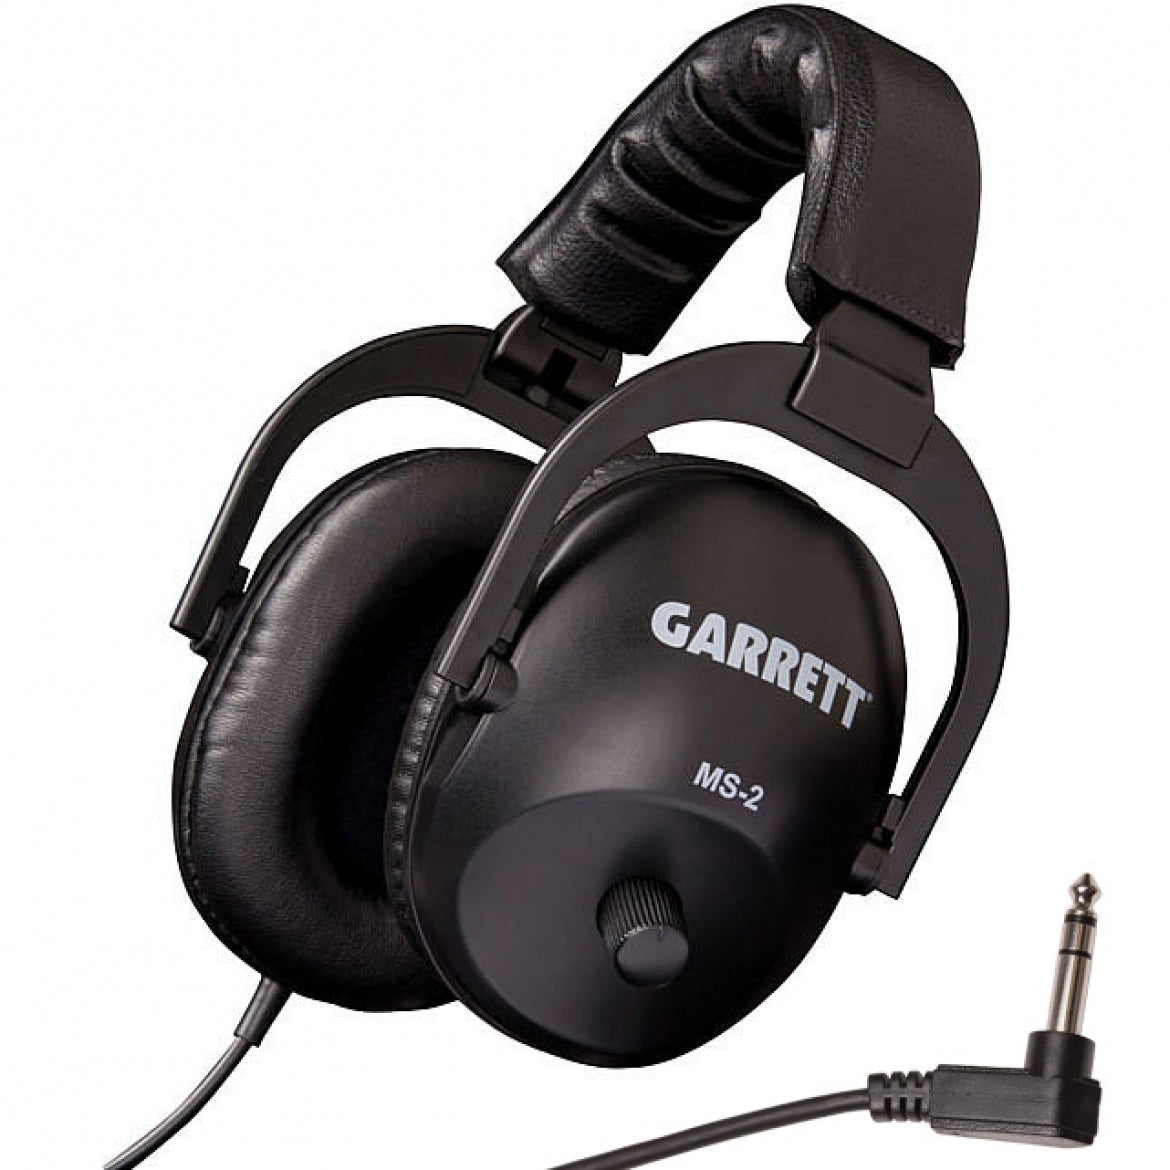 Garrett GTI 2500 with MS2 Headphones and How to Use DVD